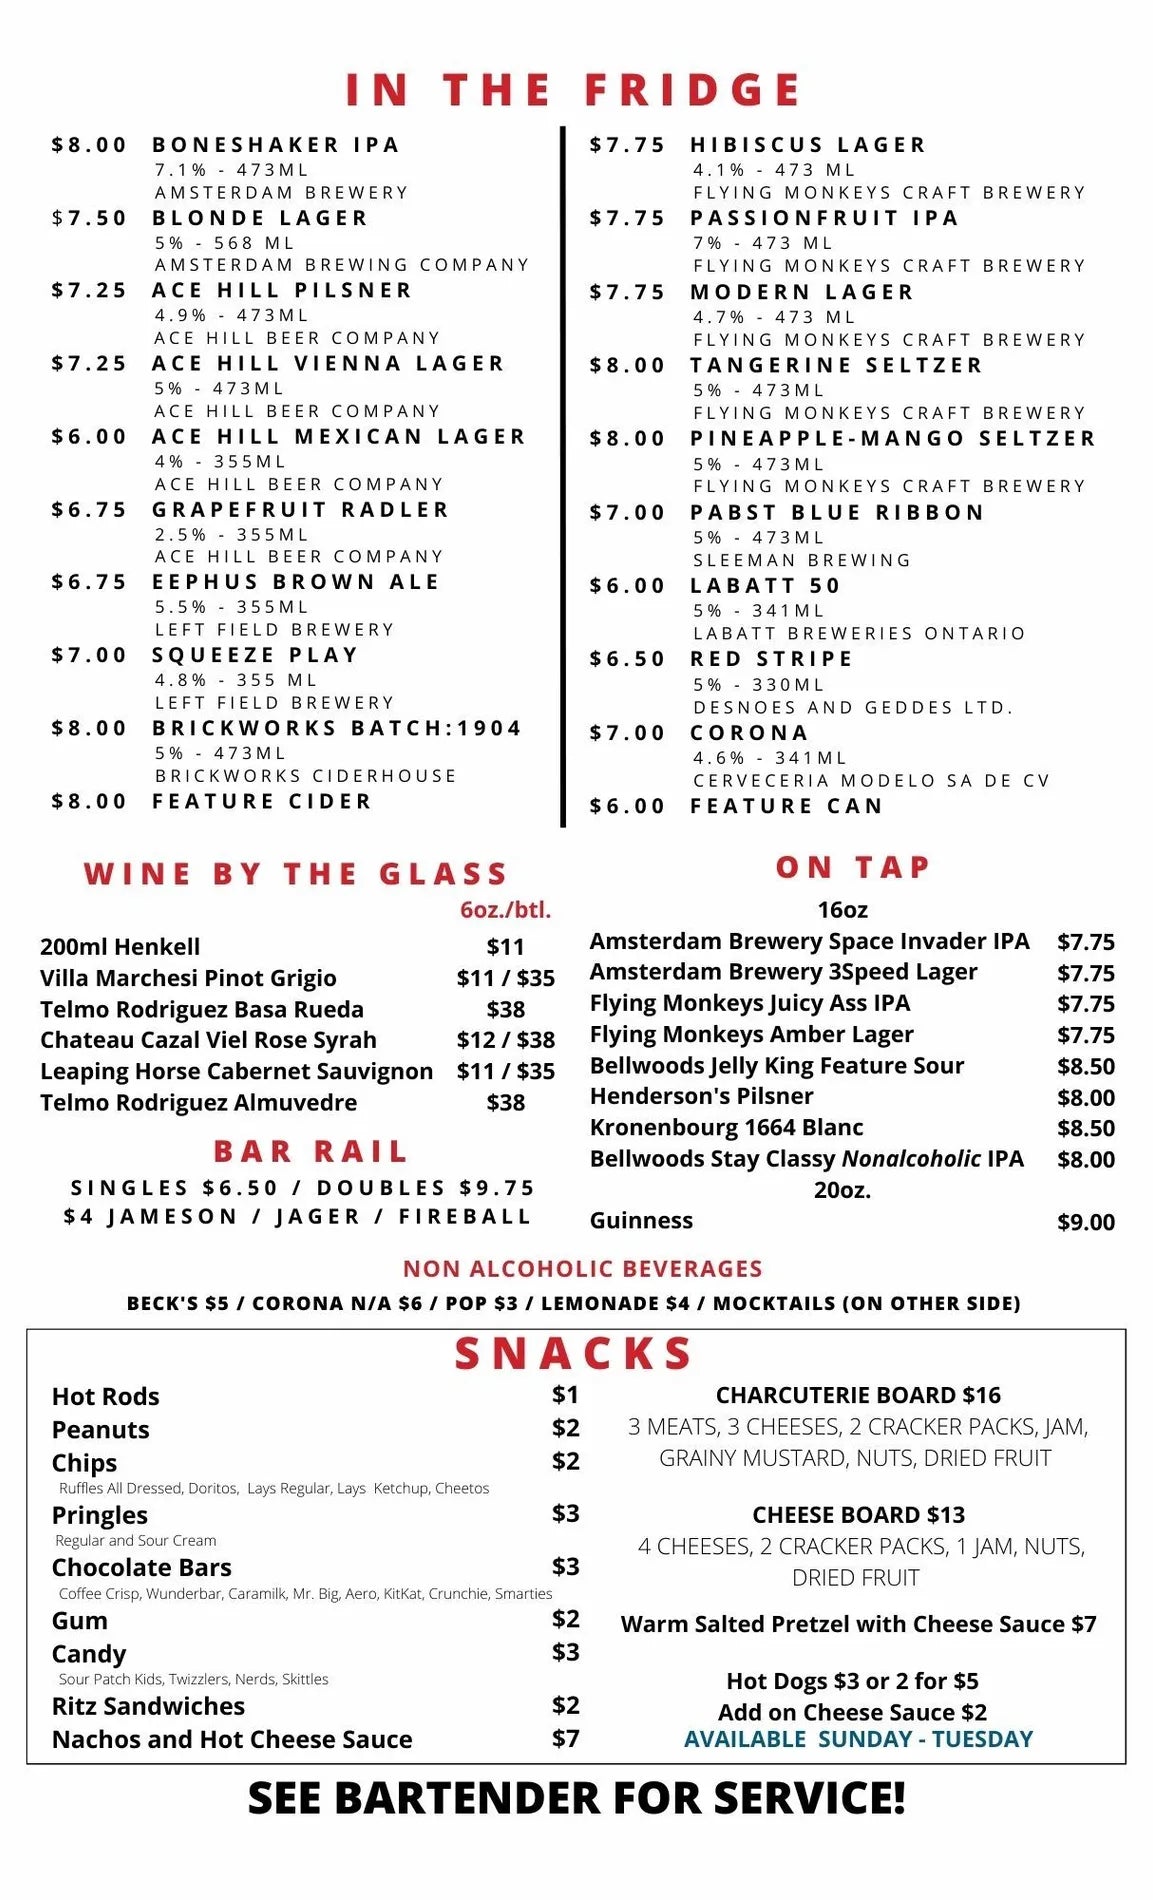 Super Bargain menu on a white background with mostly black writing. Some titles are in red text. Menu options include "In the Fridge", "Wine by the glass", "On TAP", "Bar Rail", and "Snacks"